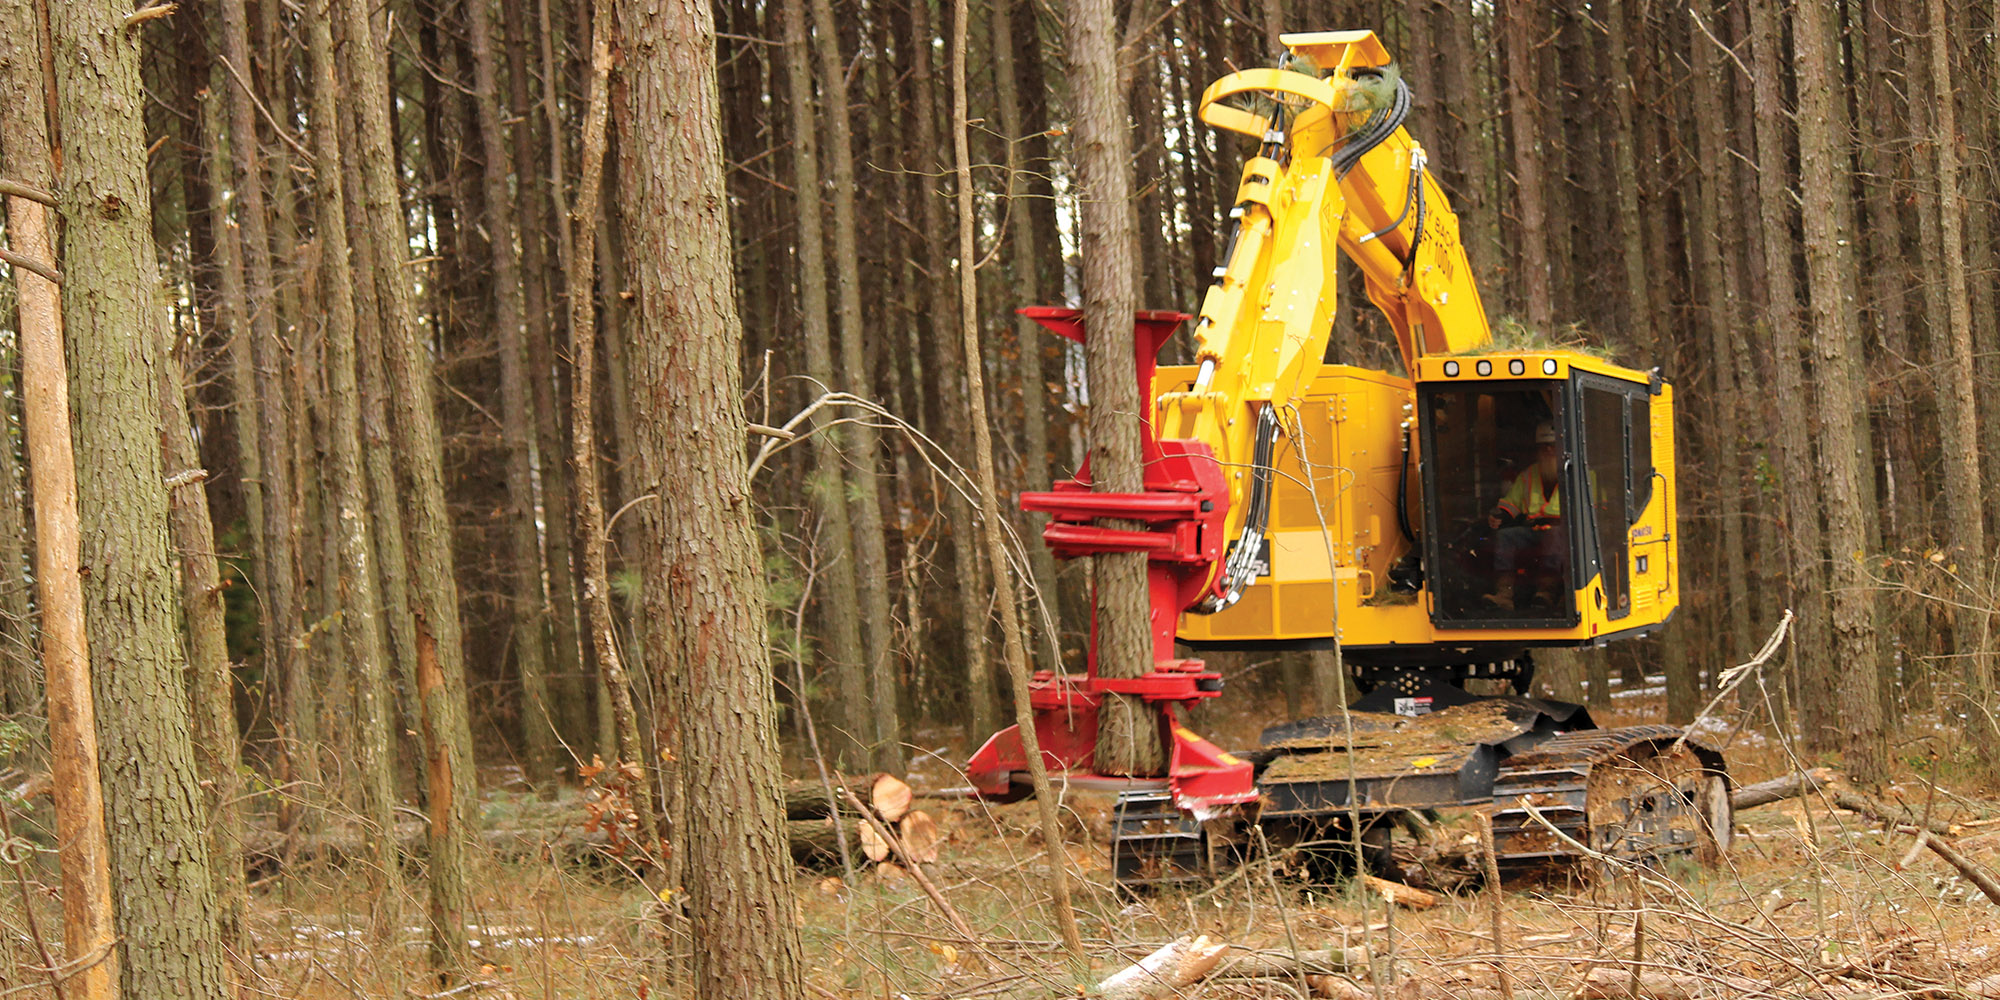 New Conversations Lead to Additional Improvements in XT-5 Series of Tracked Feller Bunchers